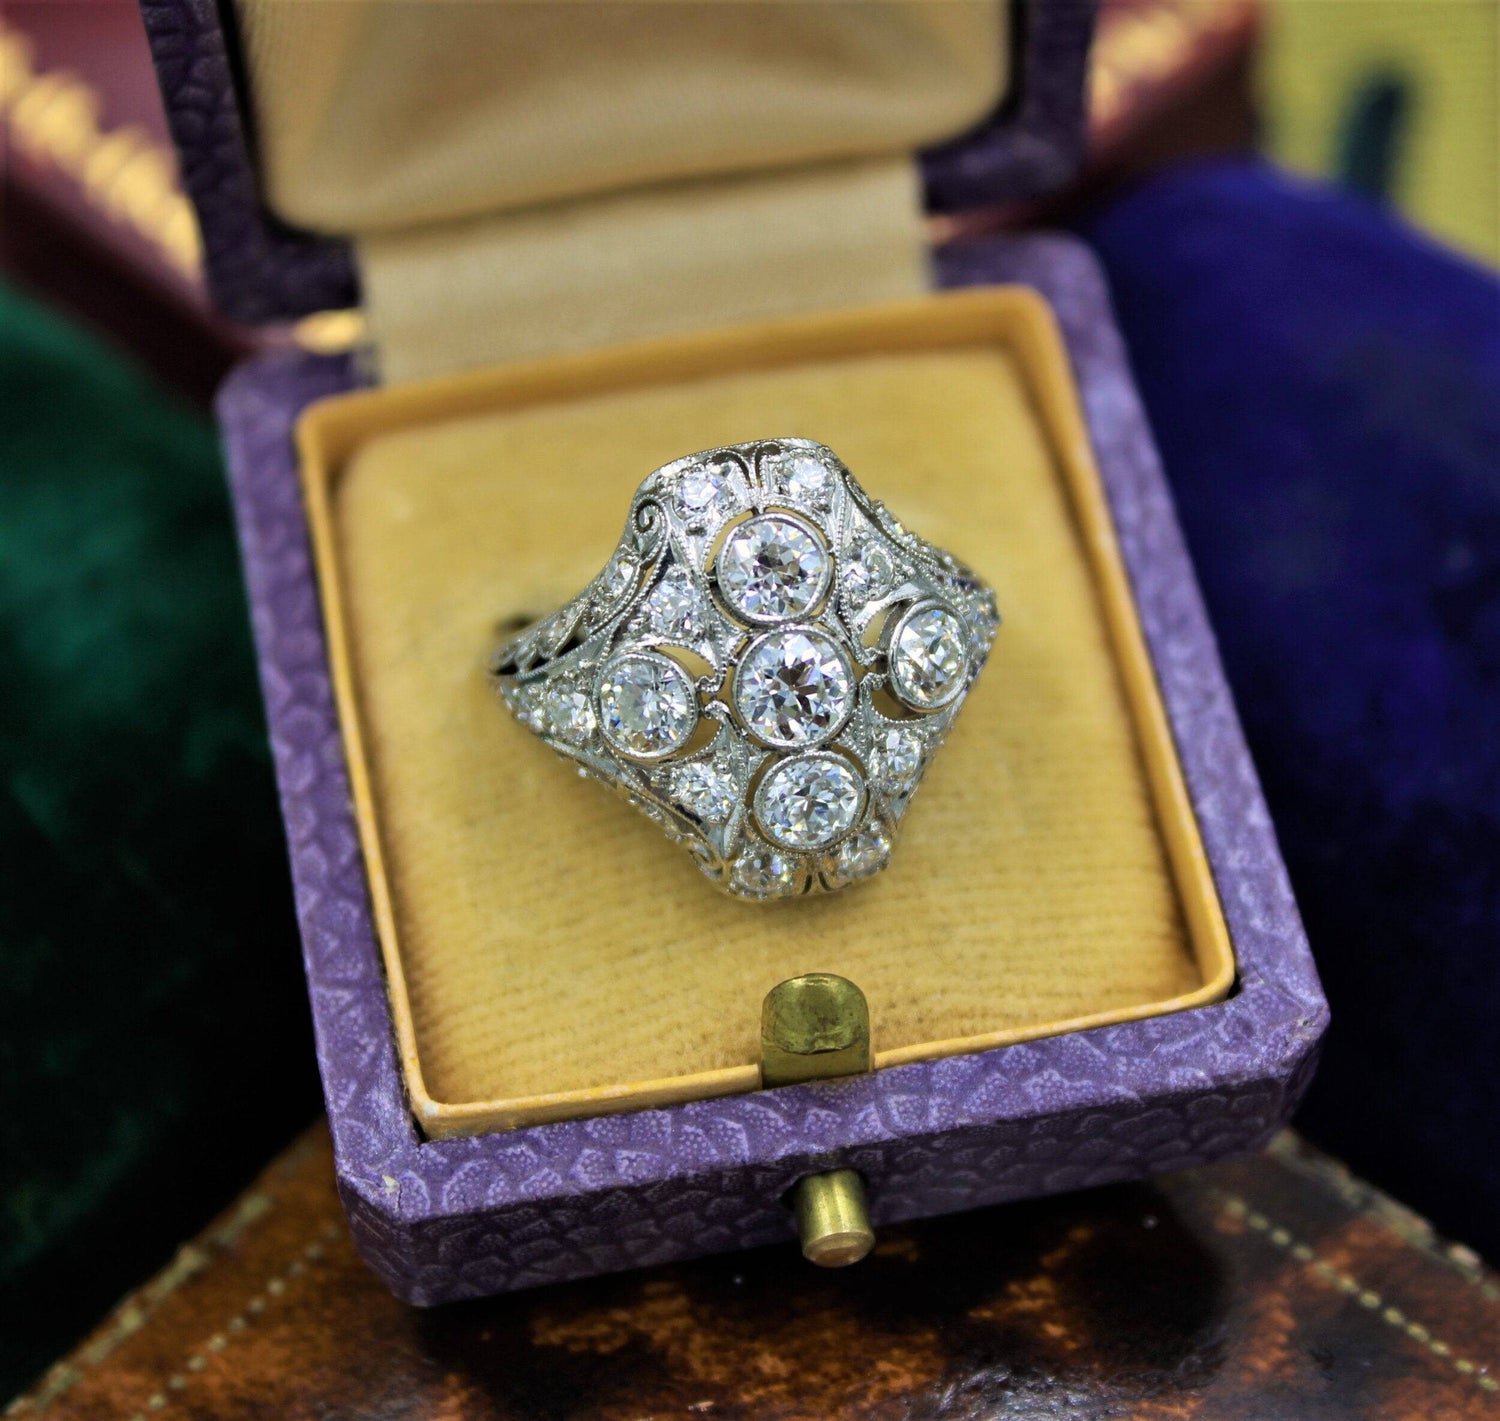 A very fine Art Deco Diamond Dress Ring mounted in Platinum and 14ct Gold, Circa 1930 - Robin Haydock Antiques